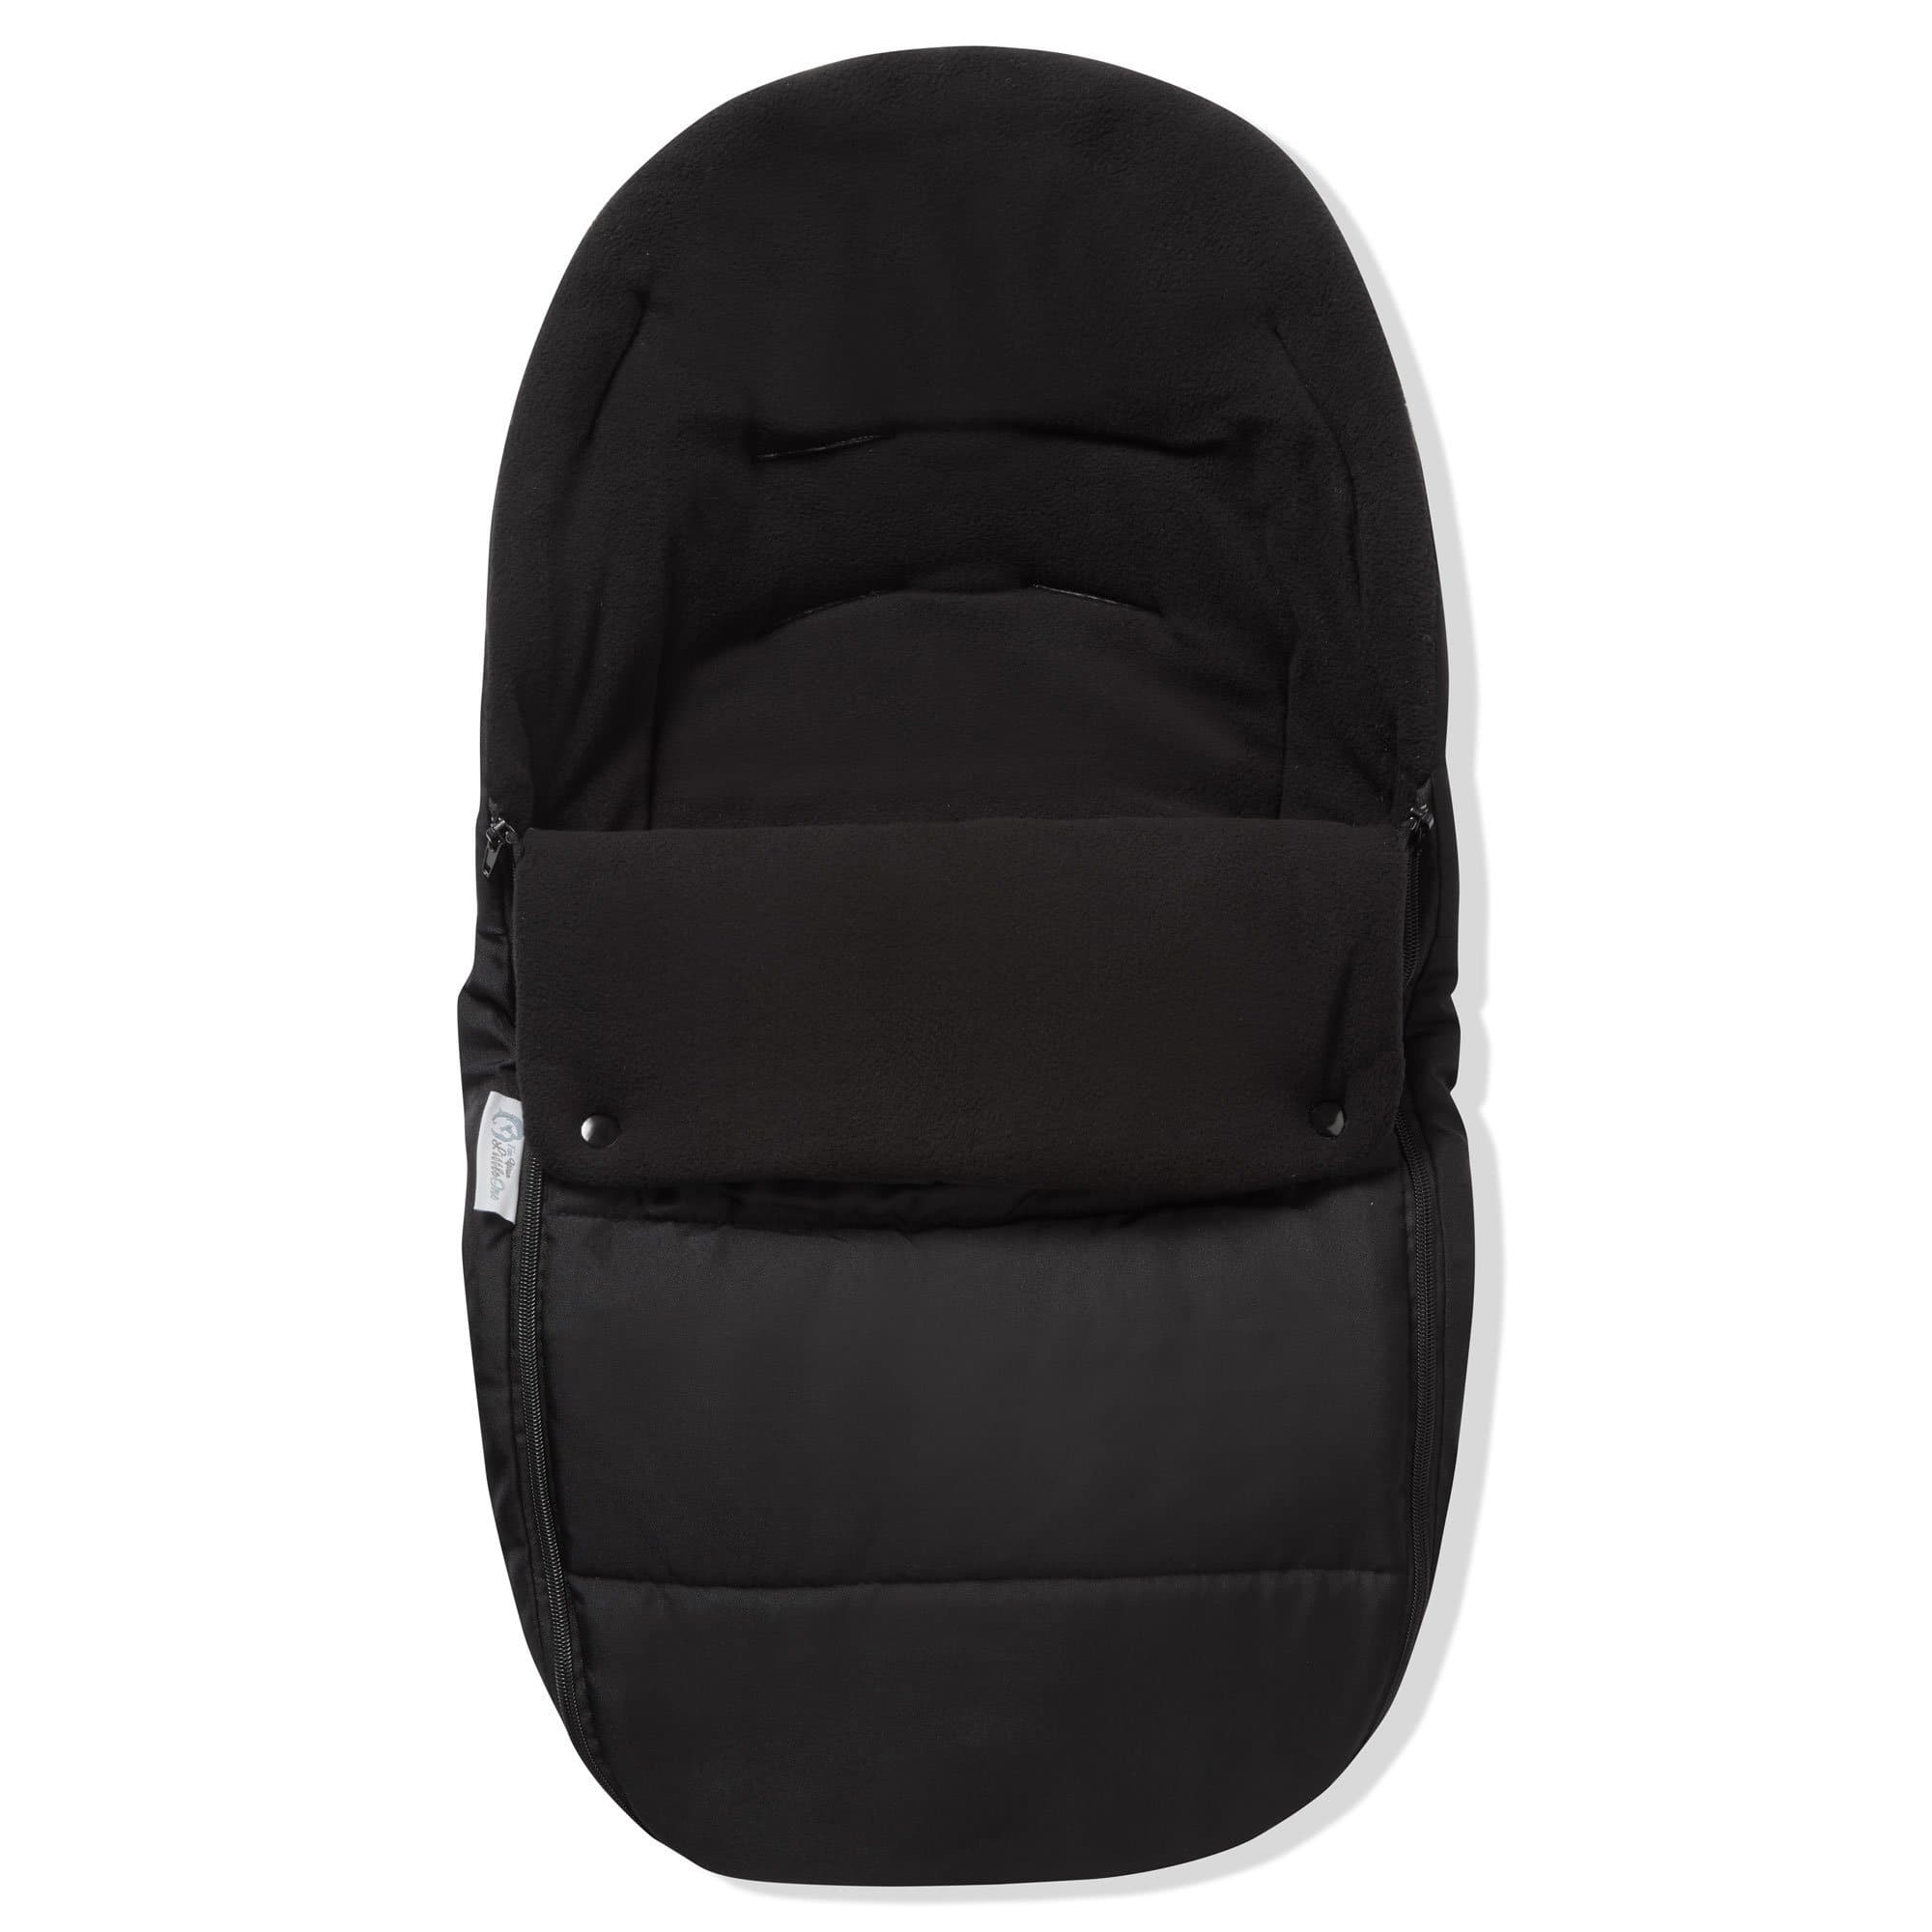 Premium Car Seat Footmuff / Cosy Toes Compatible With Koochi - Black Jack / Fits All Models | For Your Little One